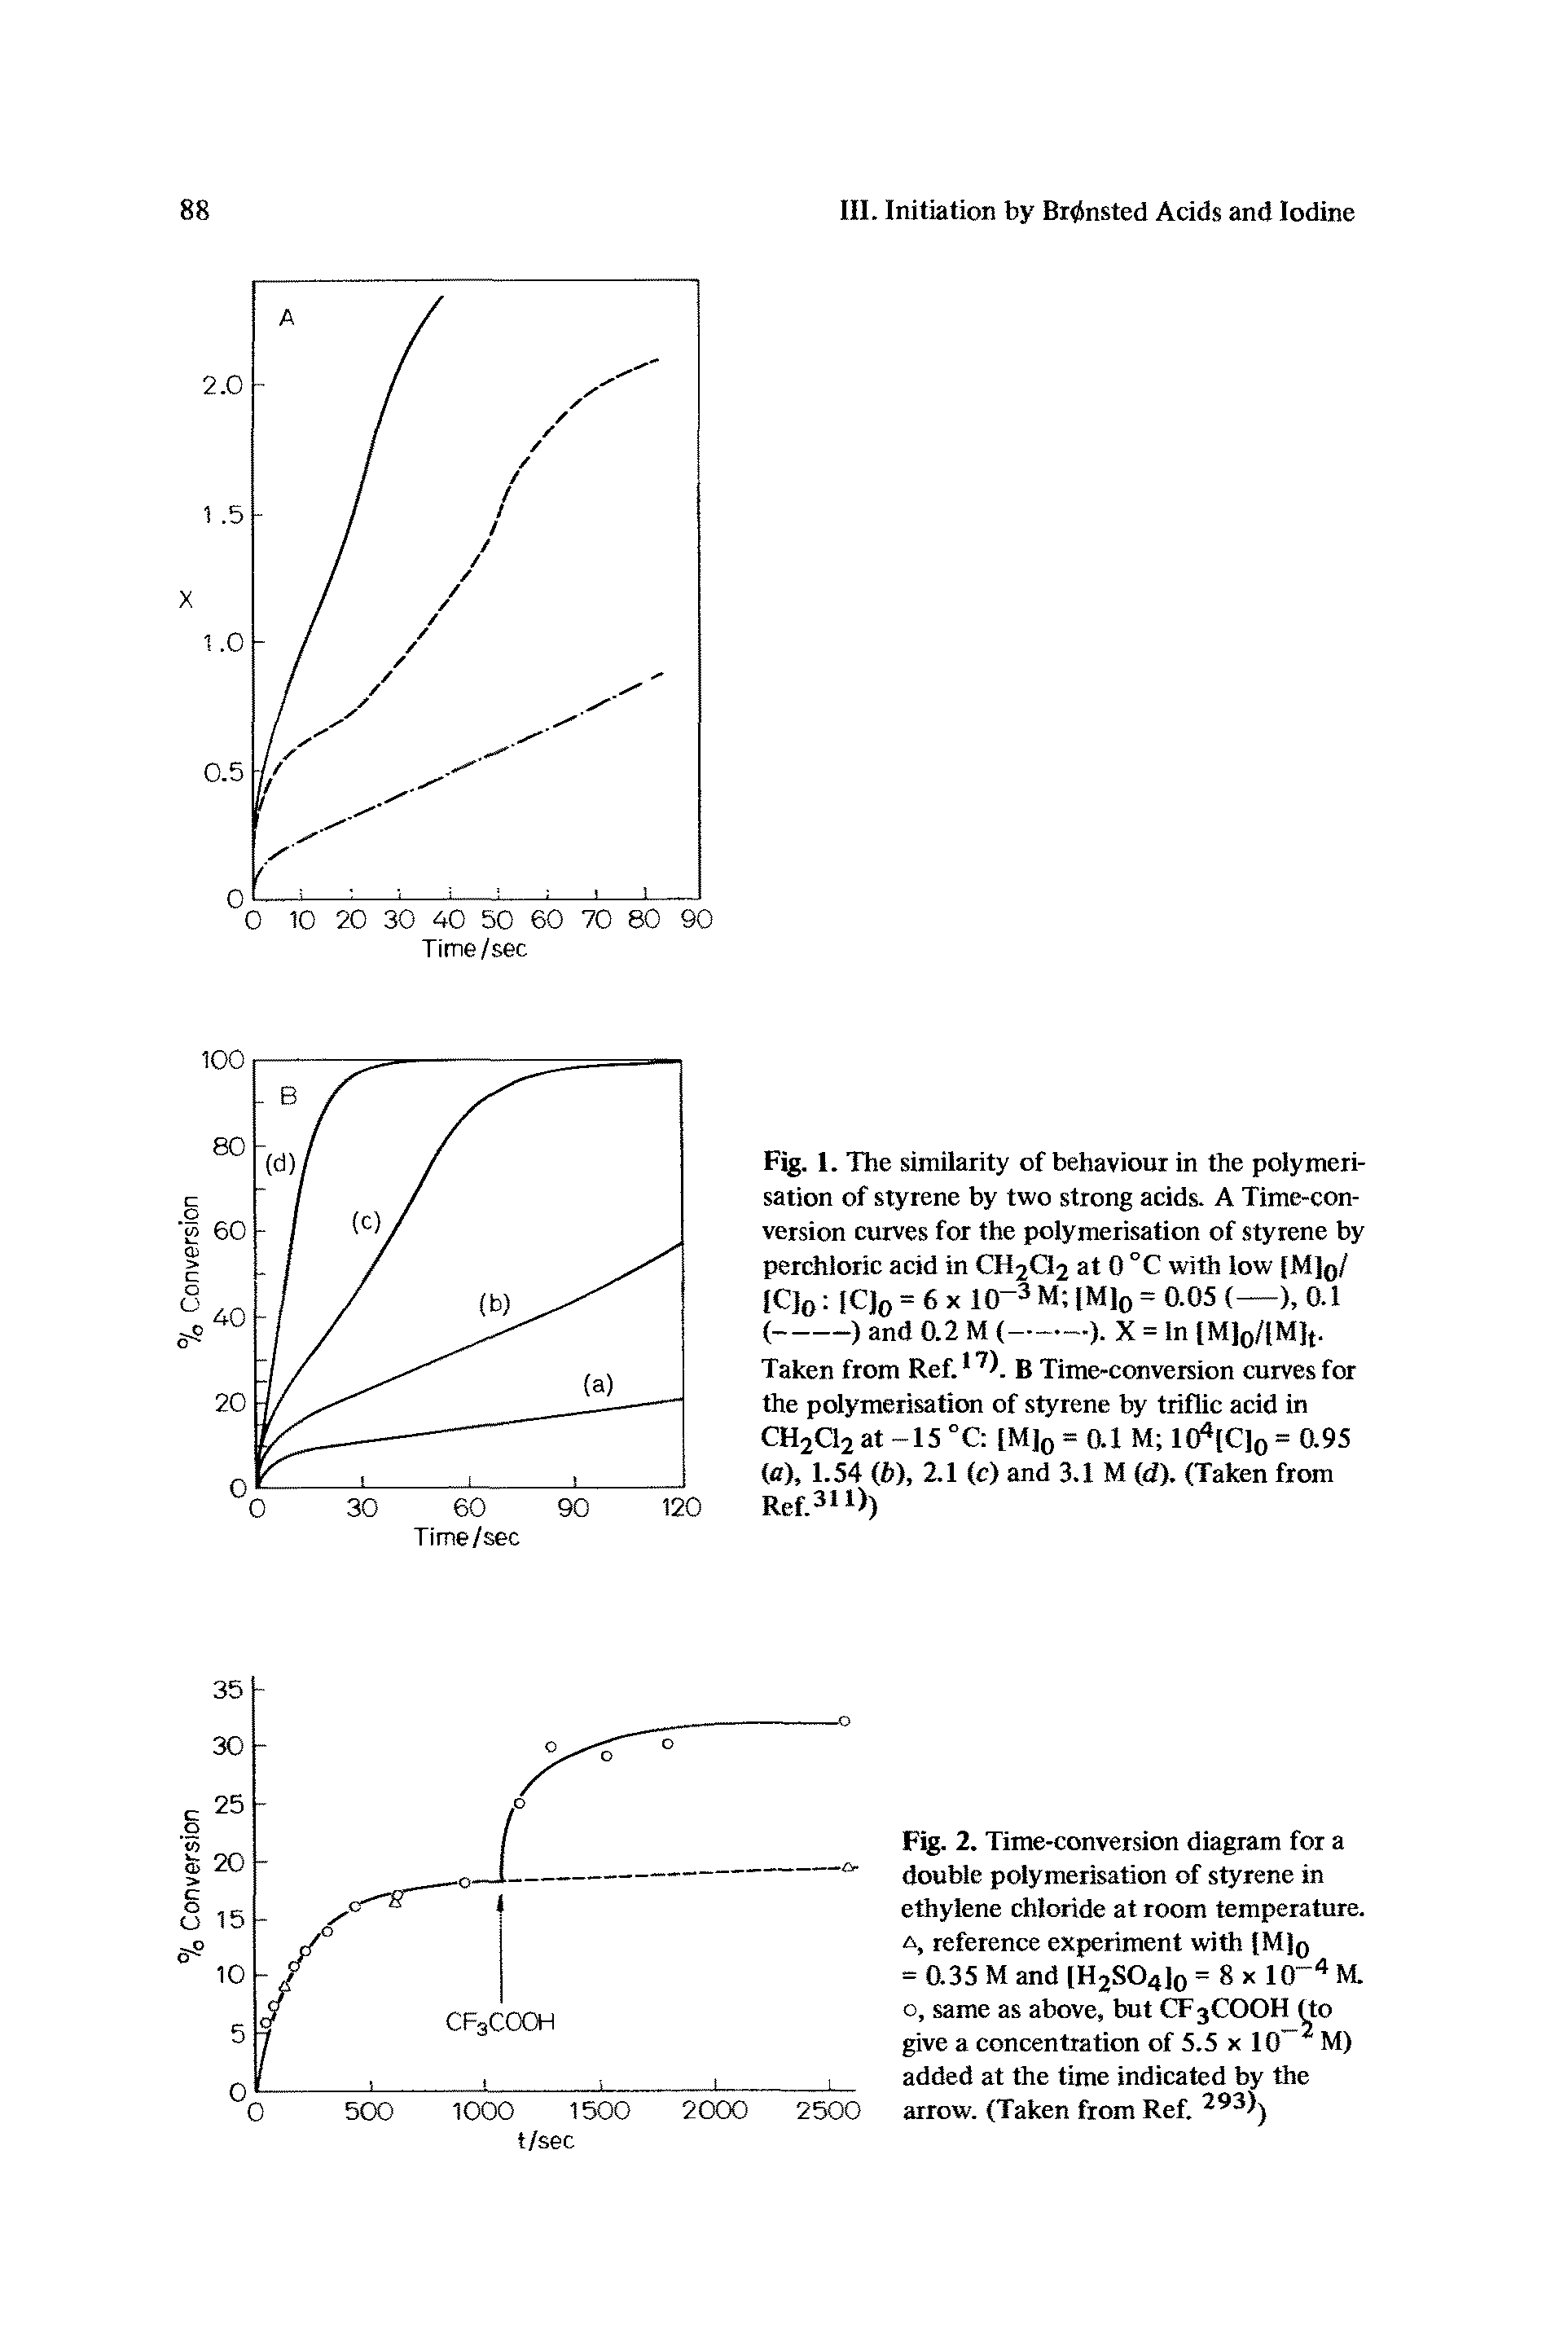 Fig. 1. The similarity of behaviour in the polymerisation of styrene by two strong acids. A Time-conversion curves for the polymerisation of styrene by perchloric acid in CH2Q2 at 0 °C with low [M]q/...